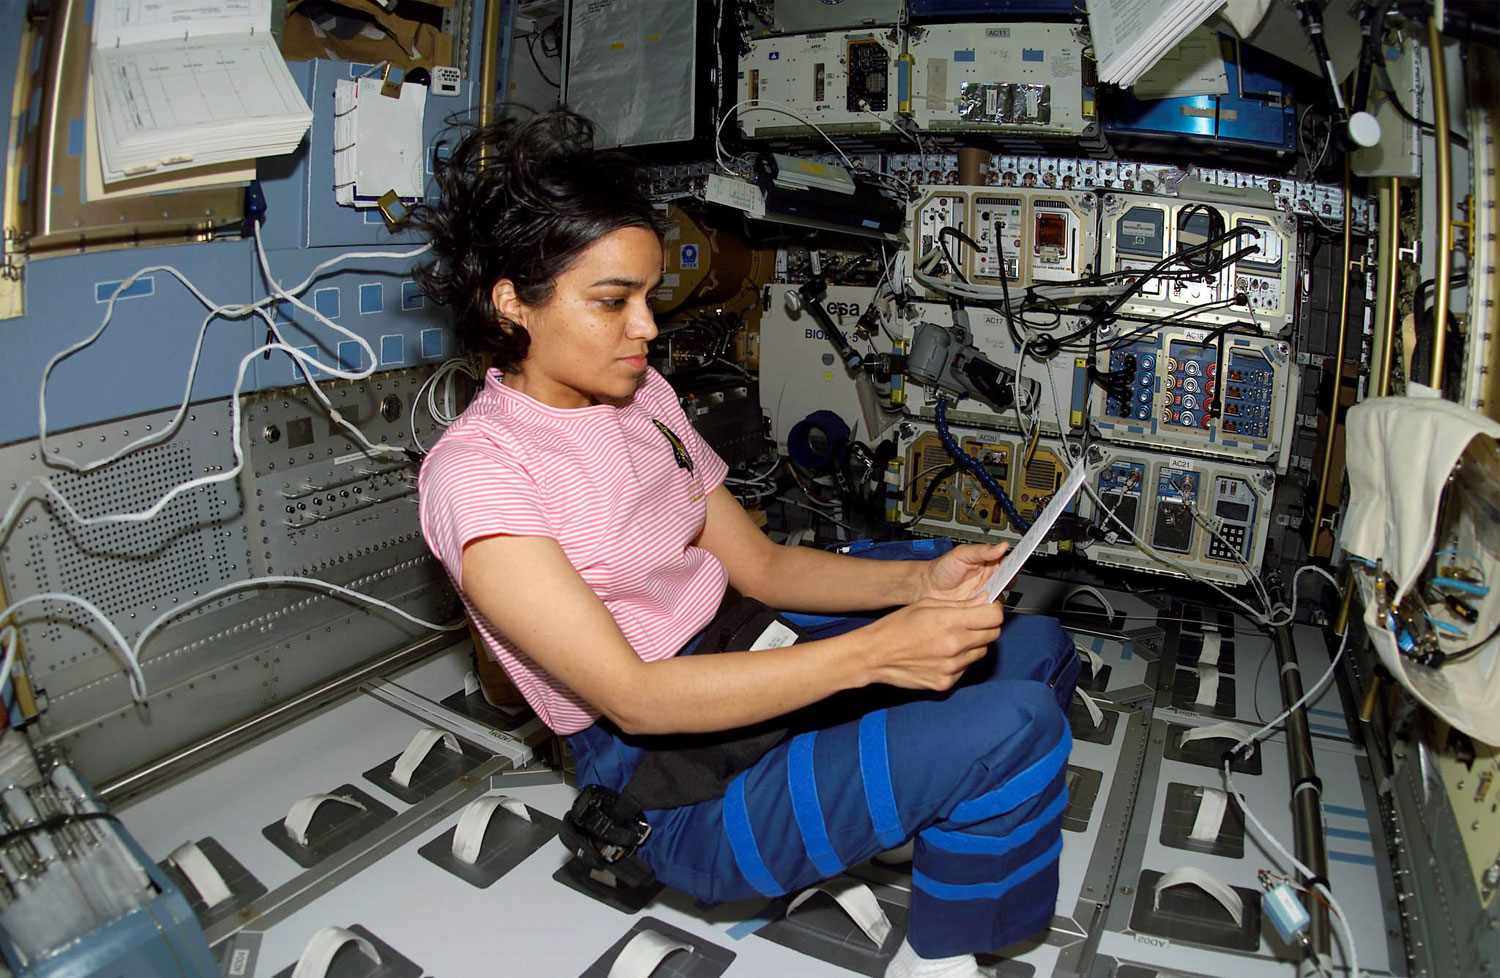 NASA astronaut Kalpana Chawla looks over a procedures checklist in the SPACEHAB Research Double Module aboard the Space Shuttle Columbia, on Jan. 27, 2003.